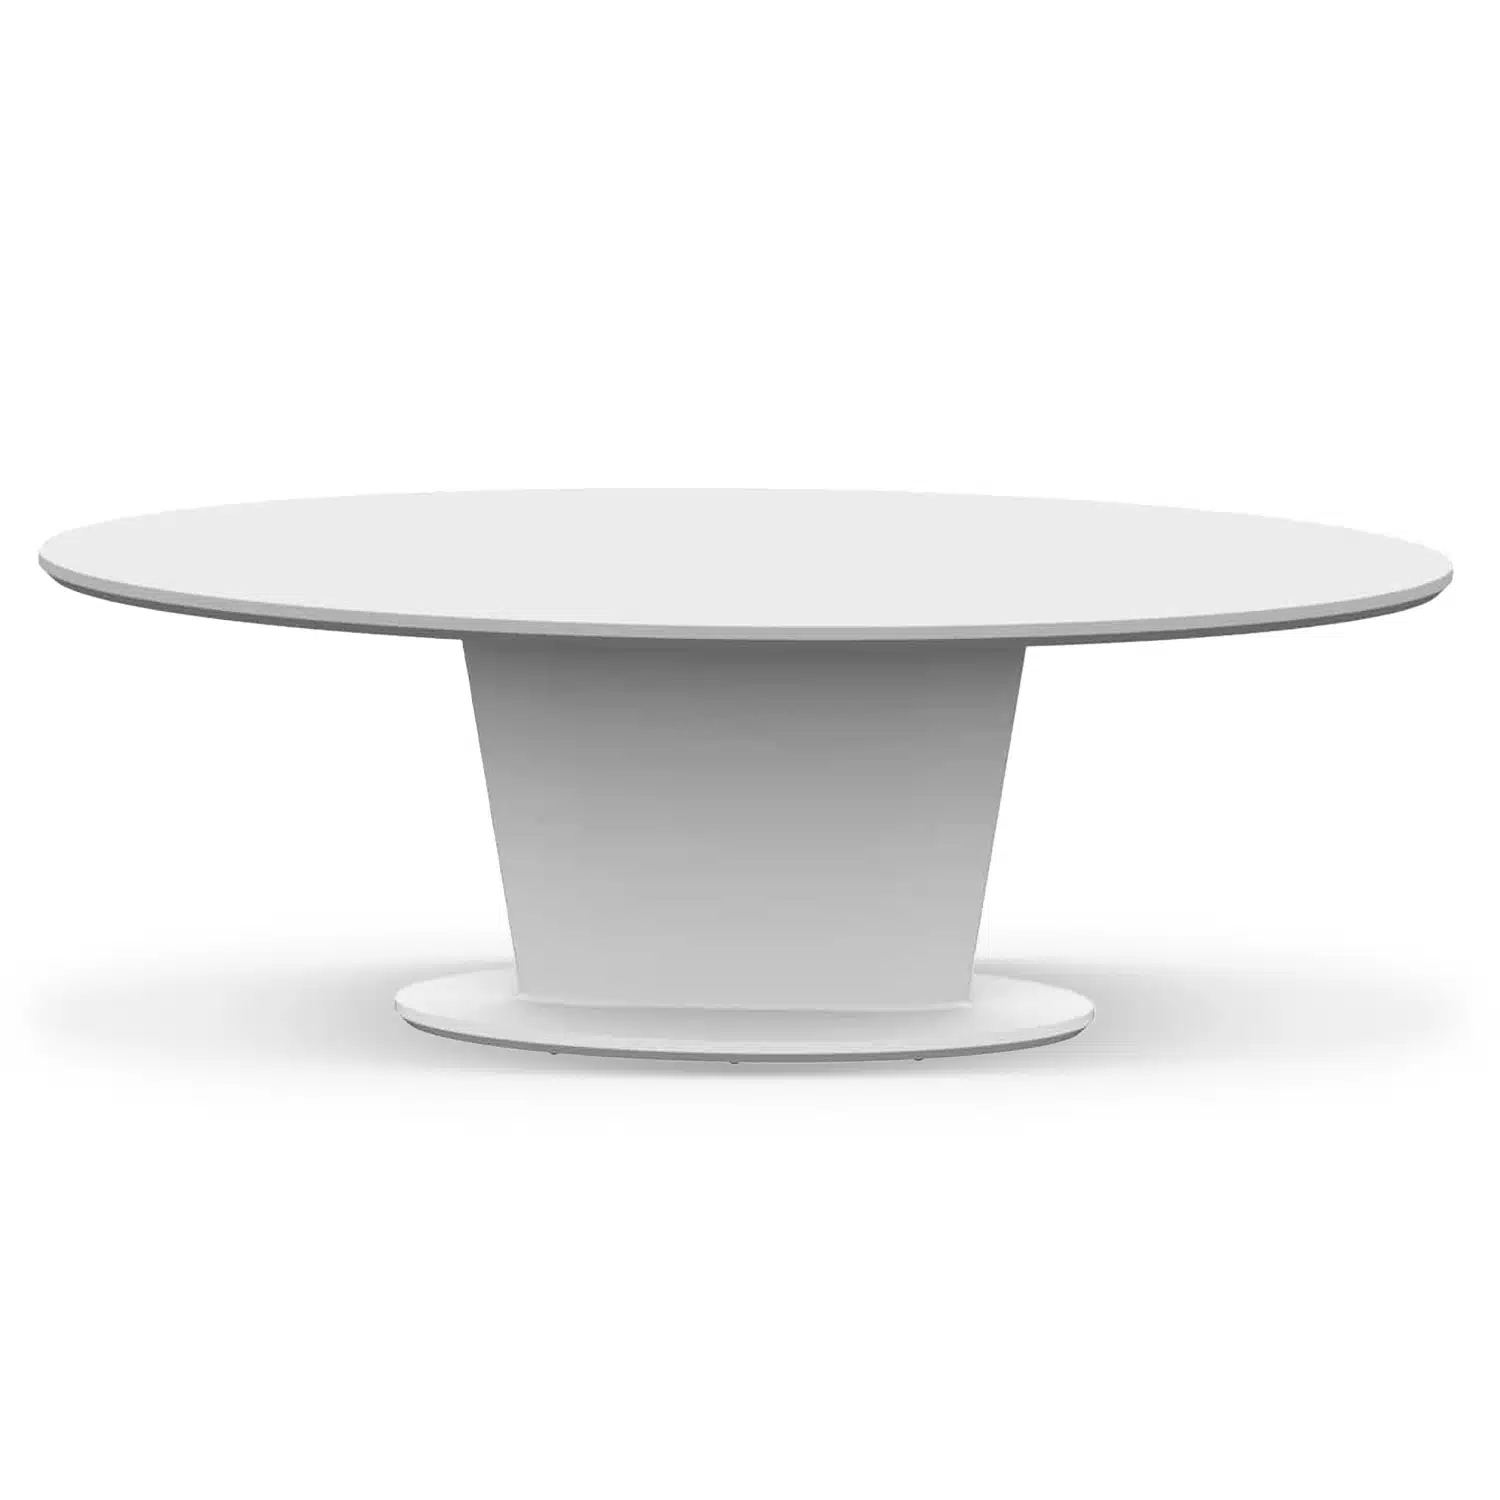 Modena – Dining Table – 1_result